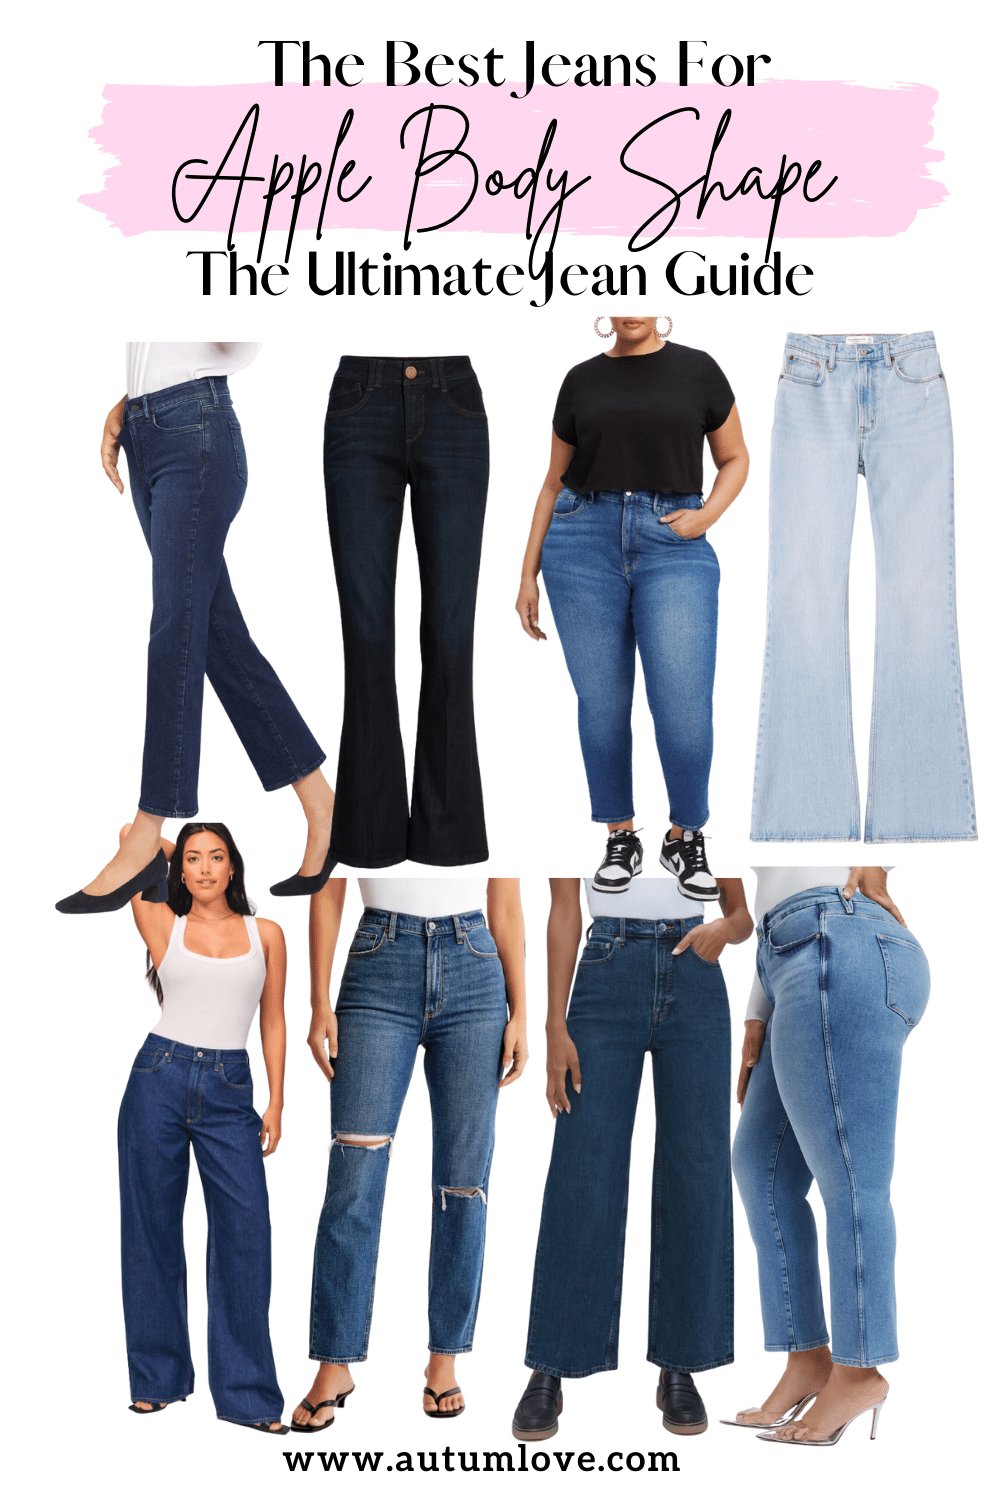 30 Best Jeans For Apple Shape: Why Fit Matters